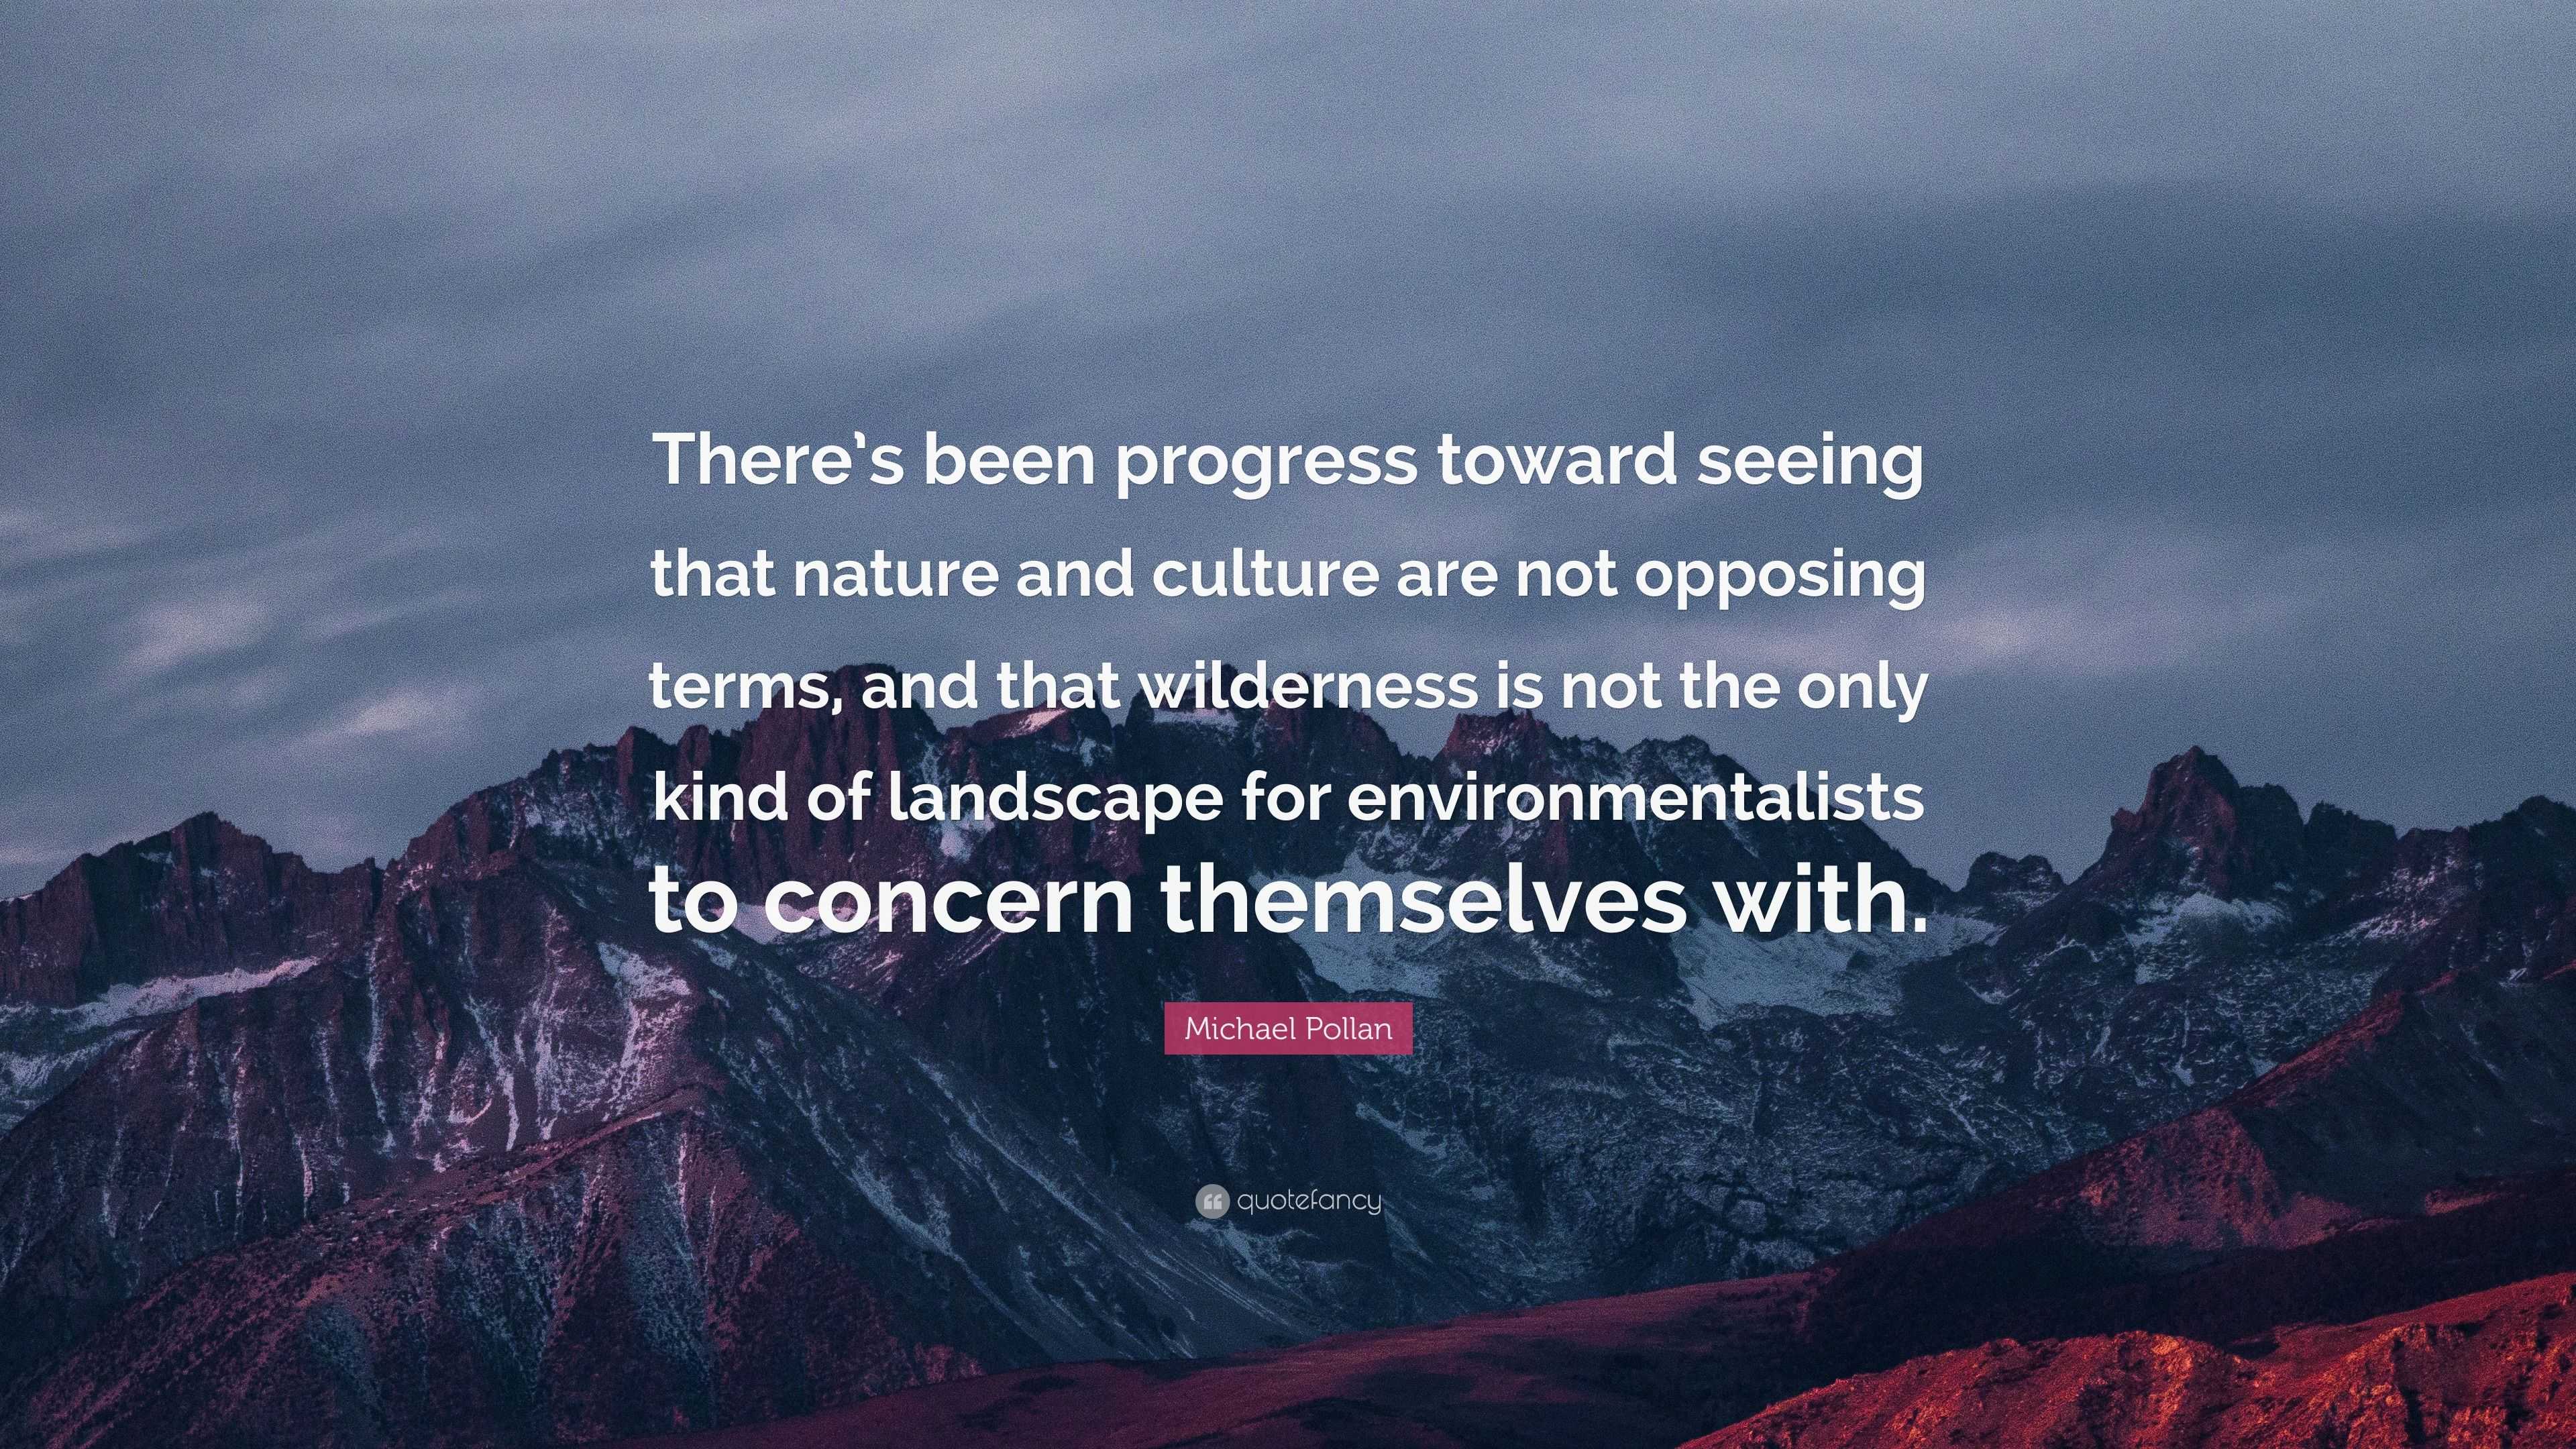 Michael Pollan Quote: “There’s been progress toward seeing that nature ...